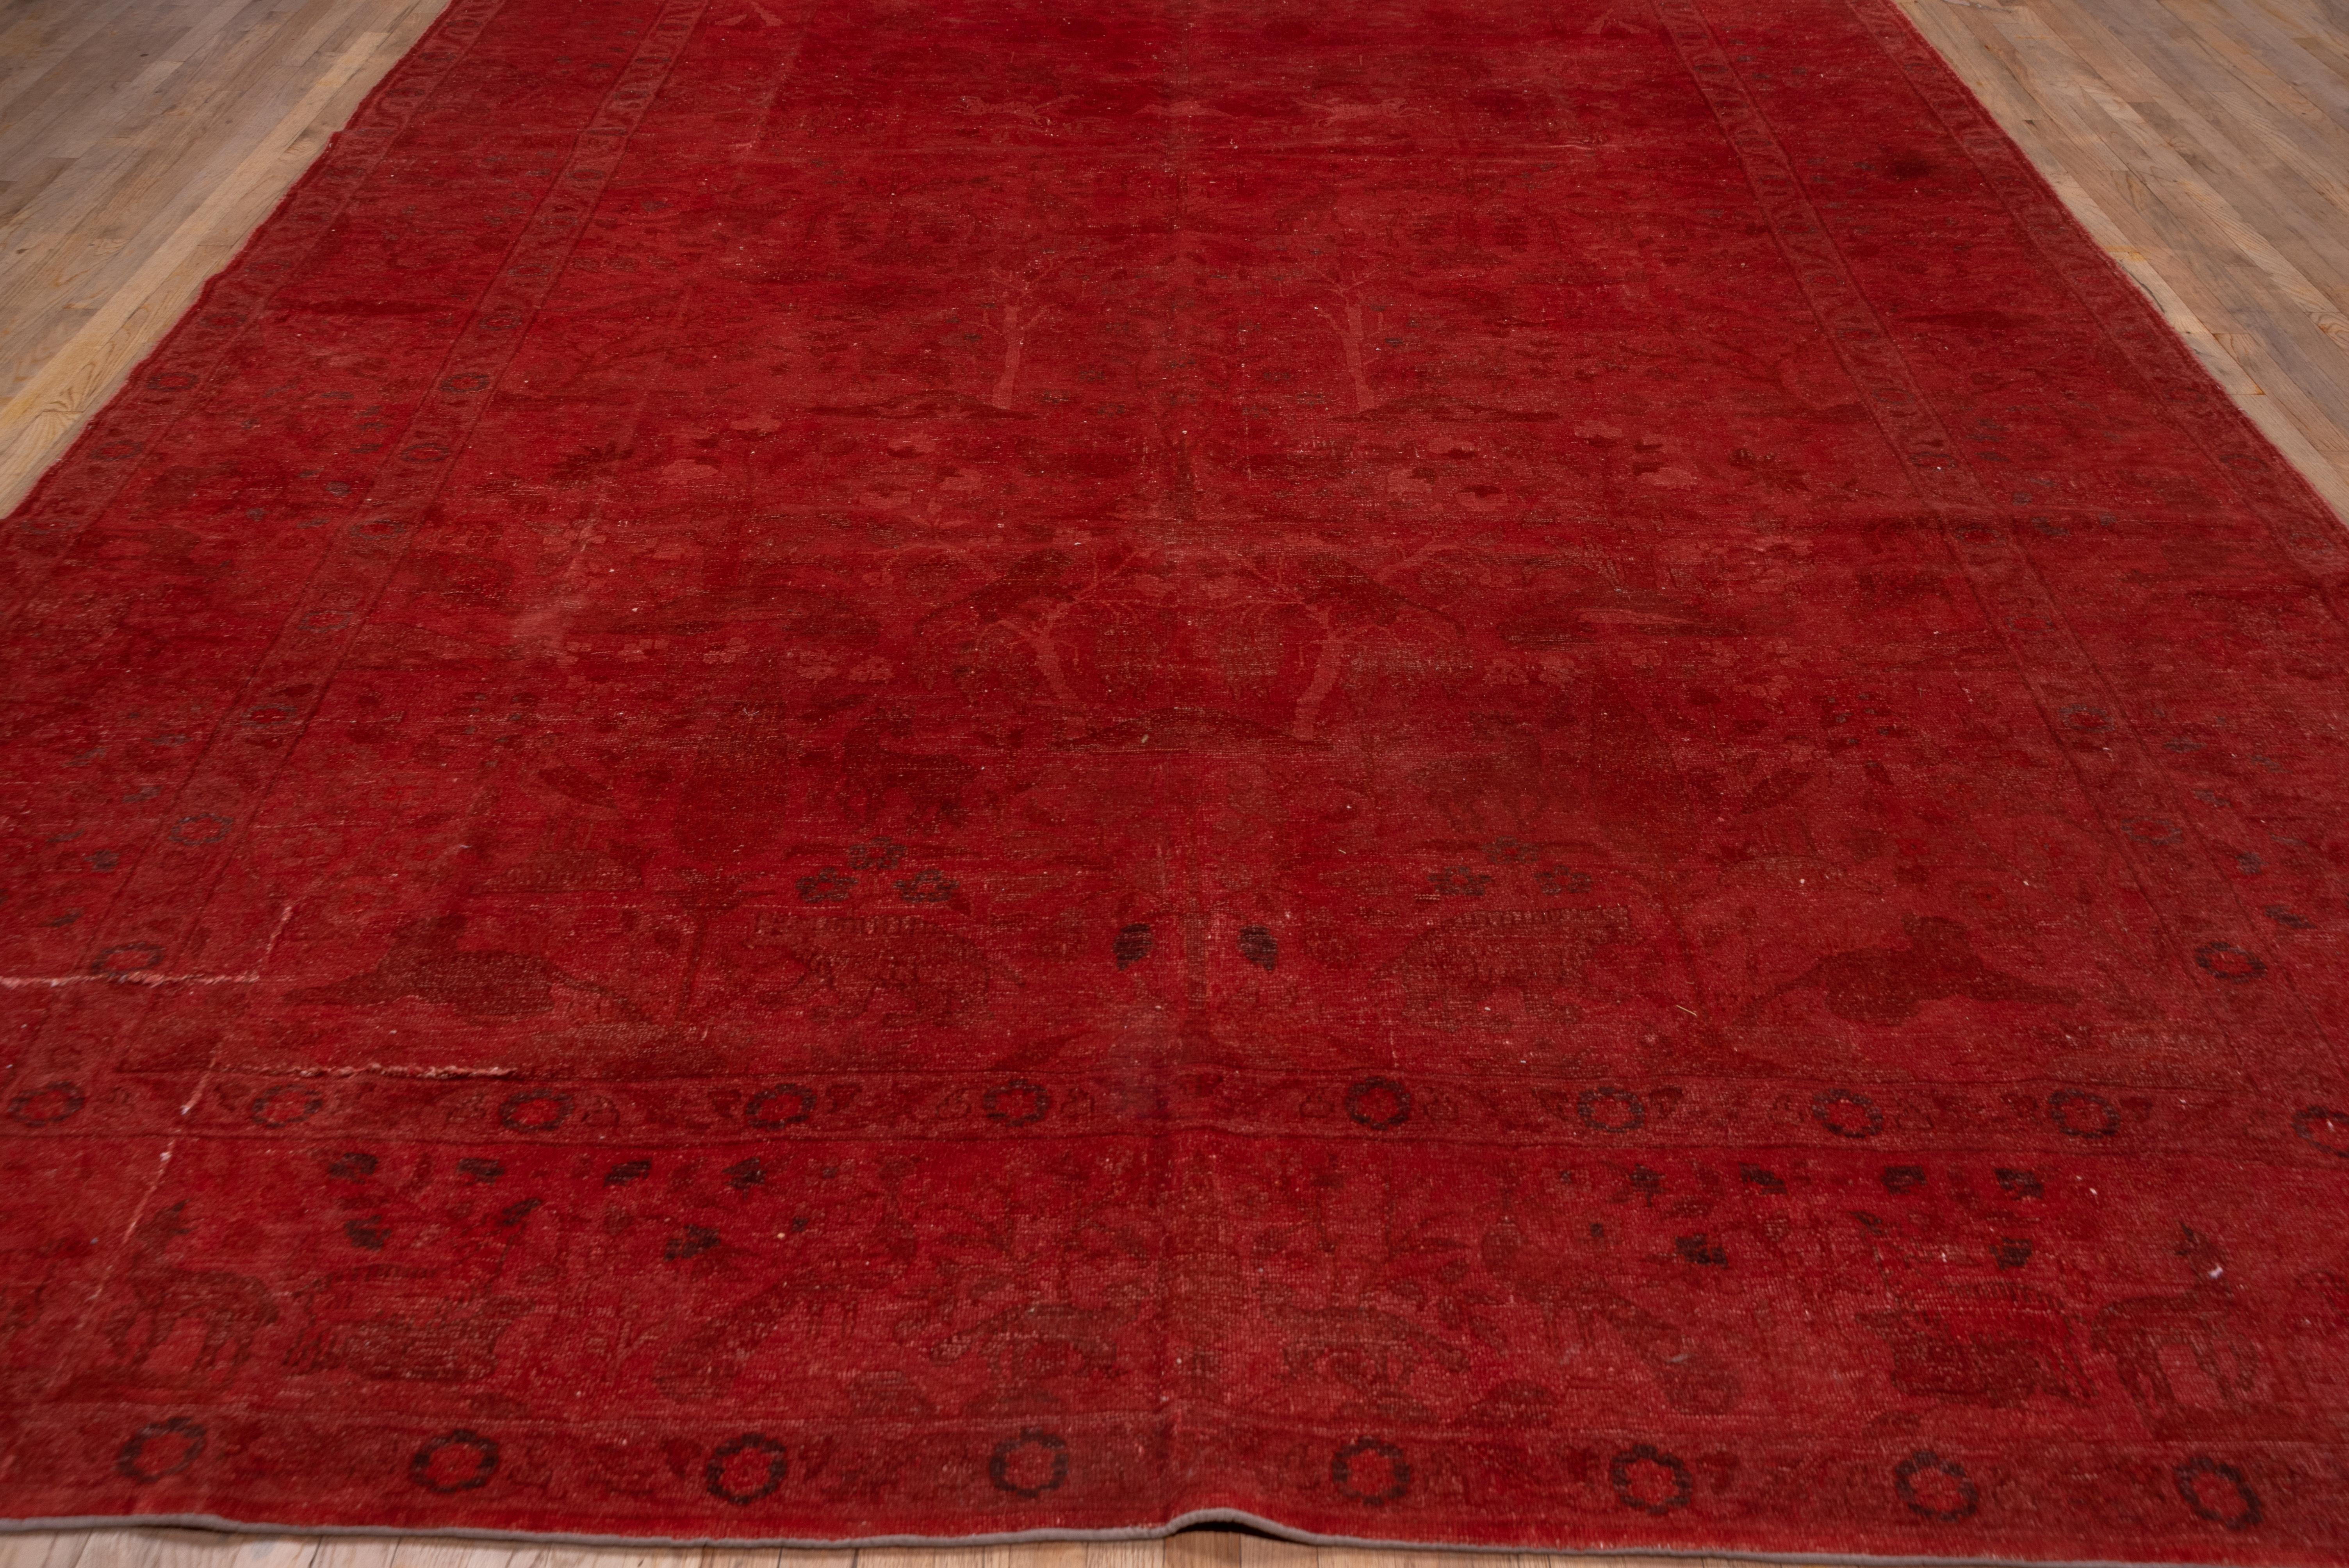 This warm red overdyed Peshawer carpet shows a tone-on-tone pattern of flowering trees and shrubs, within a broad border of cypresses and other trees.